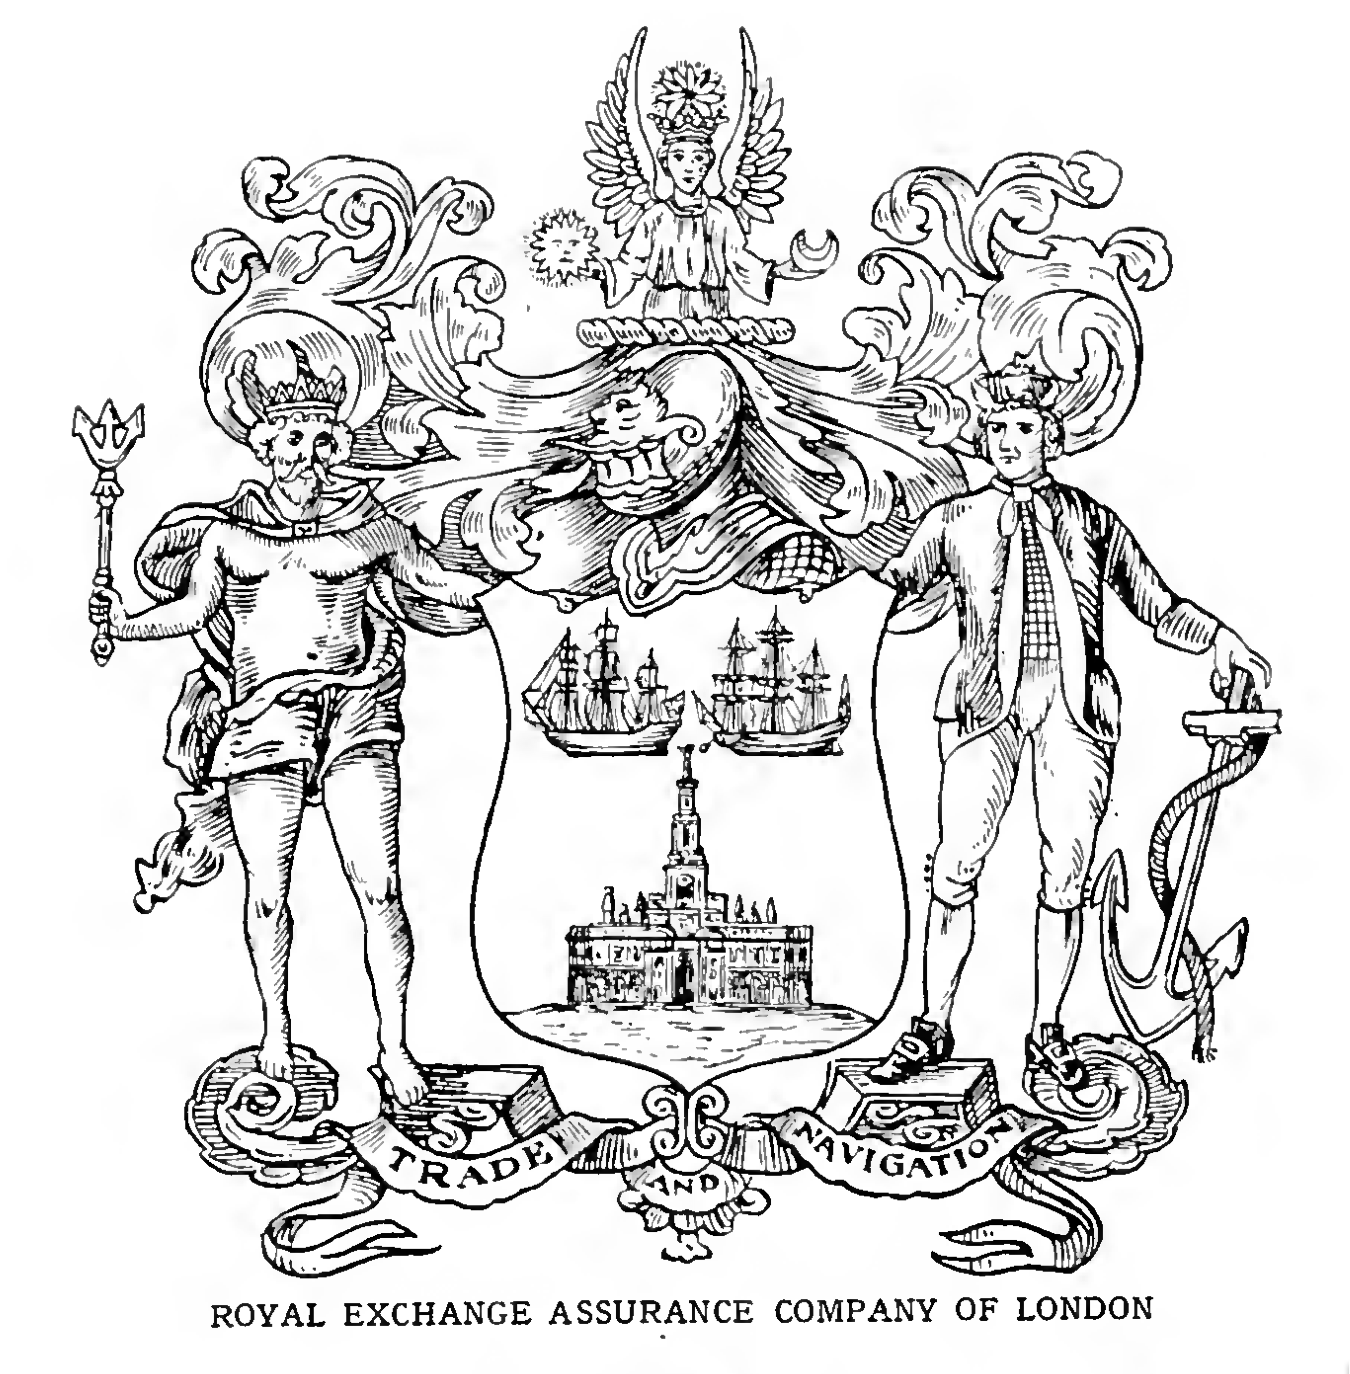 ROYAL EXCHANGE ASSURANCE COMPANY OF LONDON, The